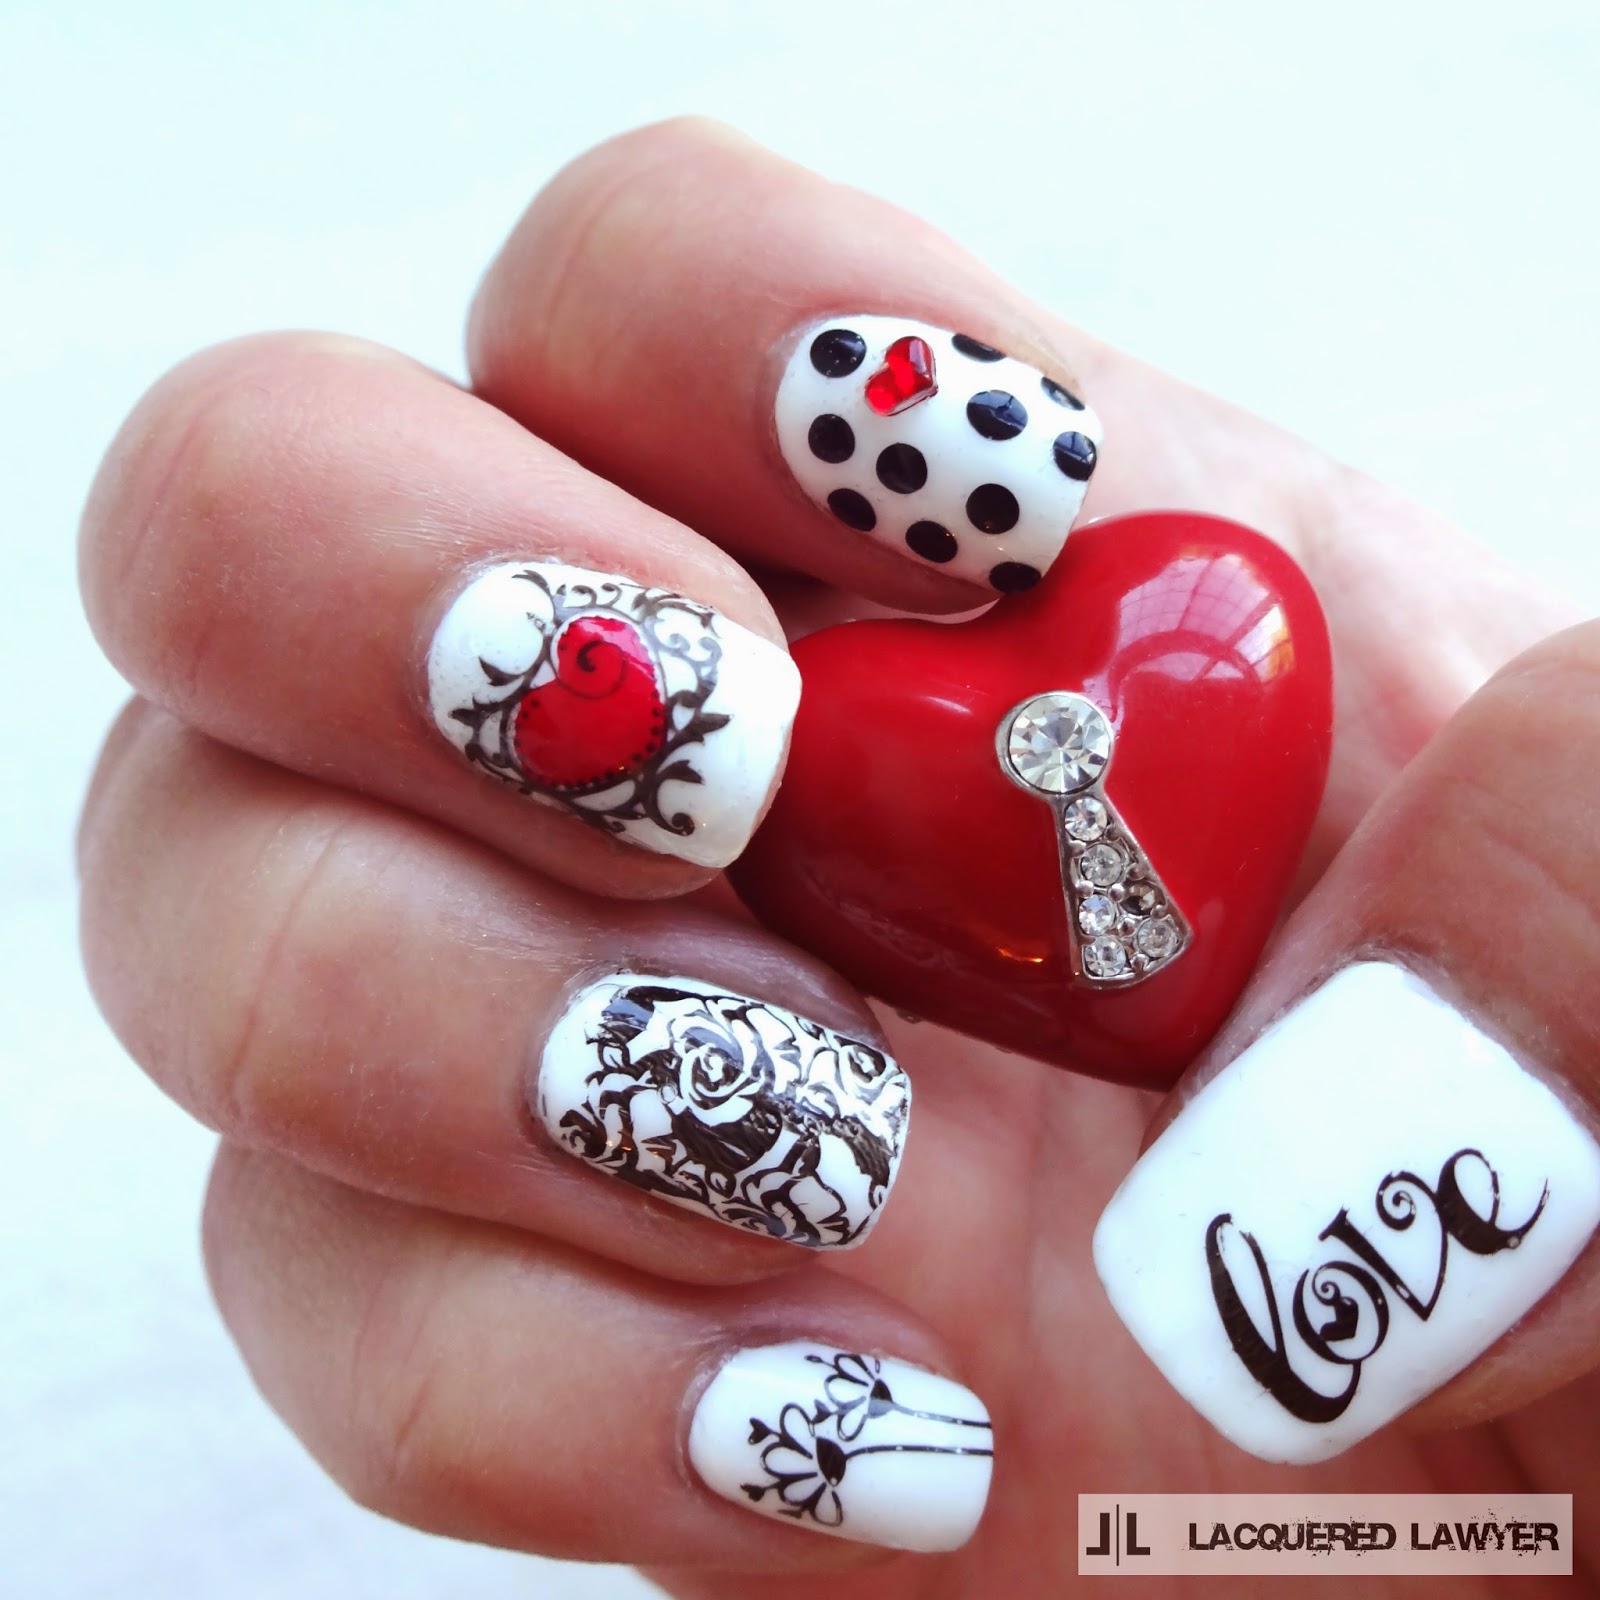 Lacquered Lawyer | Nail Art Blog: Love is Black and White